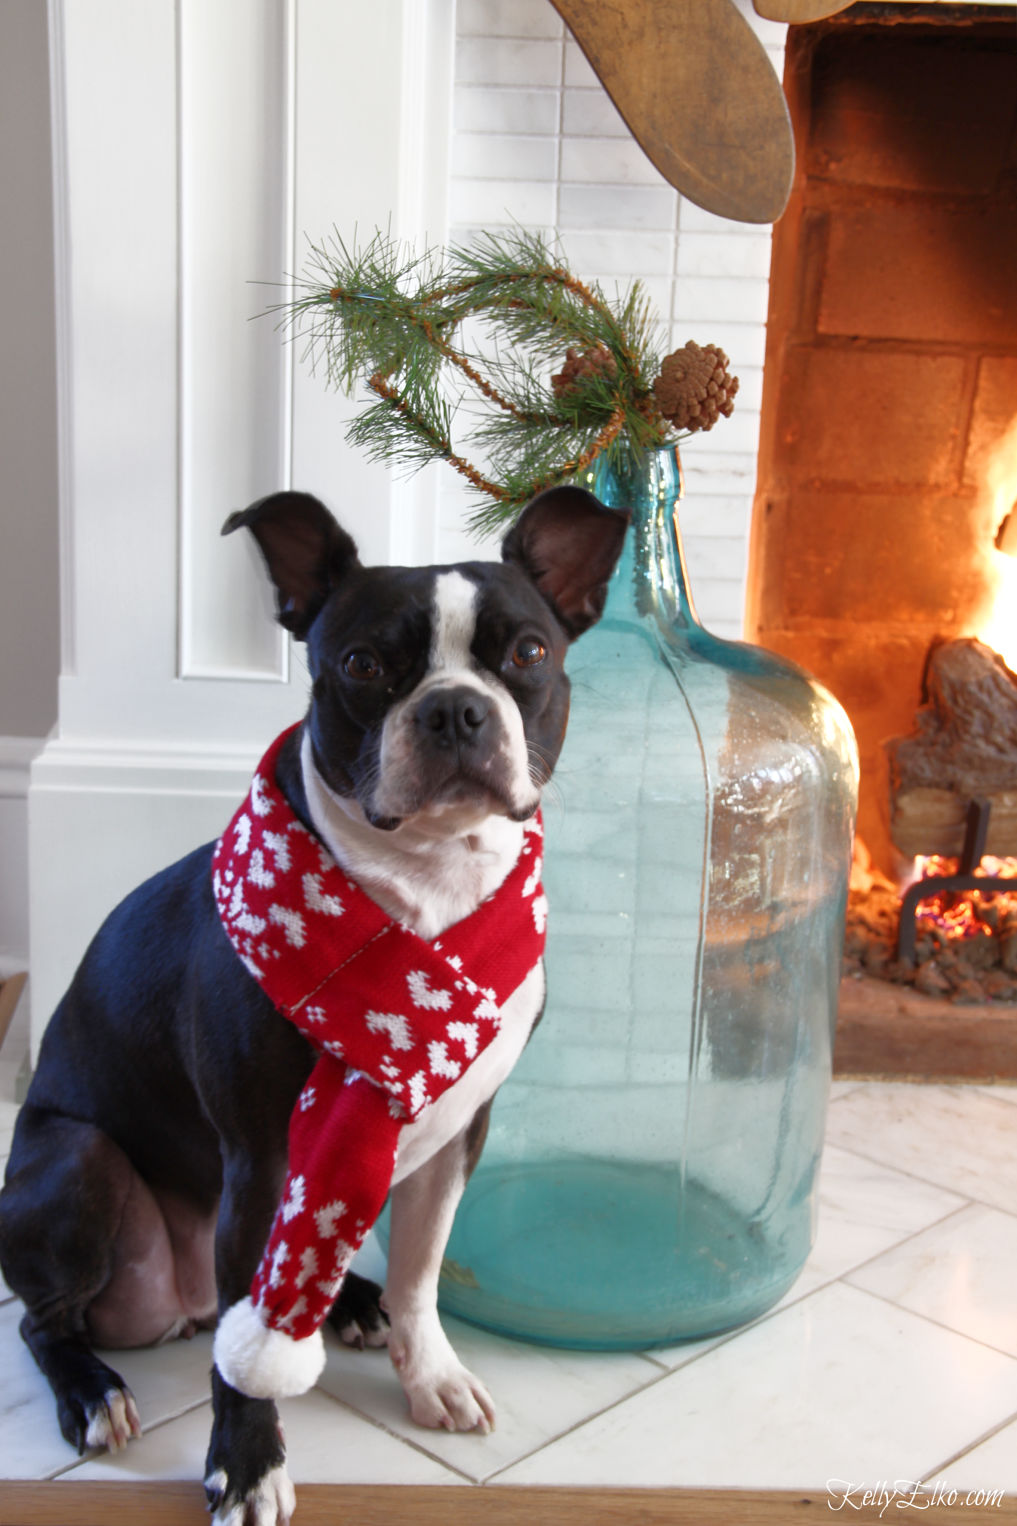 Dogs in Sweaters! Love this scarf on this Boston Terrier kellyelko.com #petclothes #dogclothes #dogsweater #bostonterrier #kellyelko